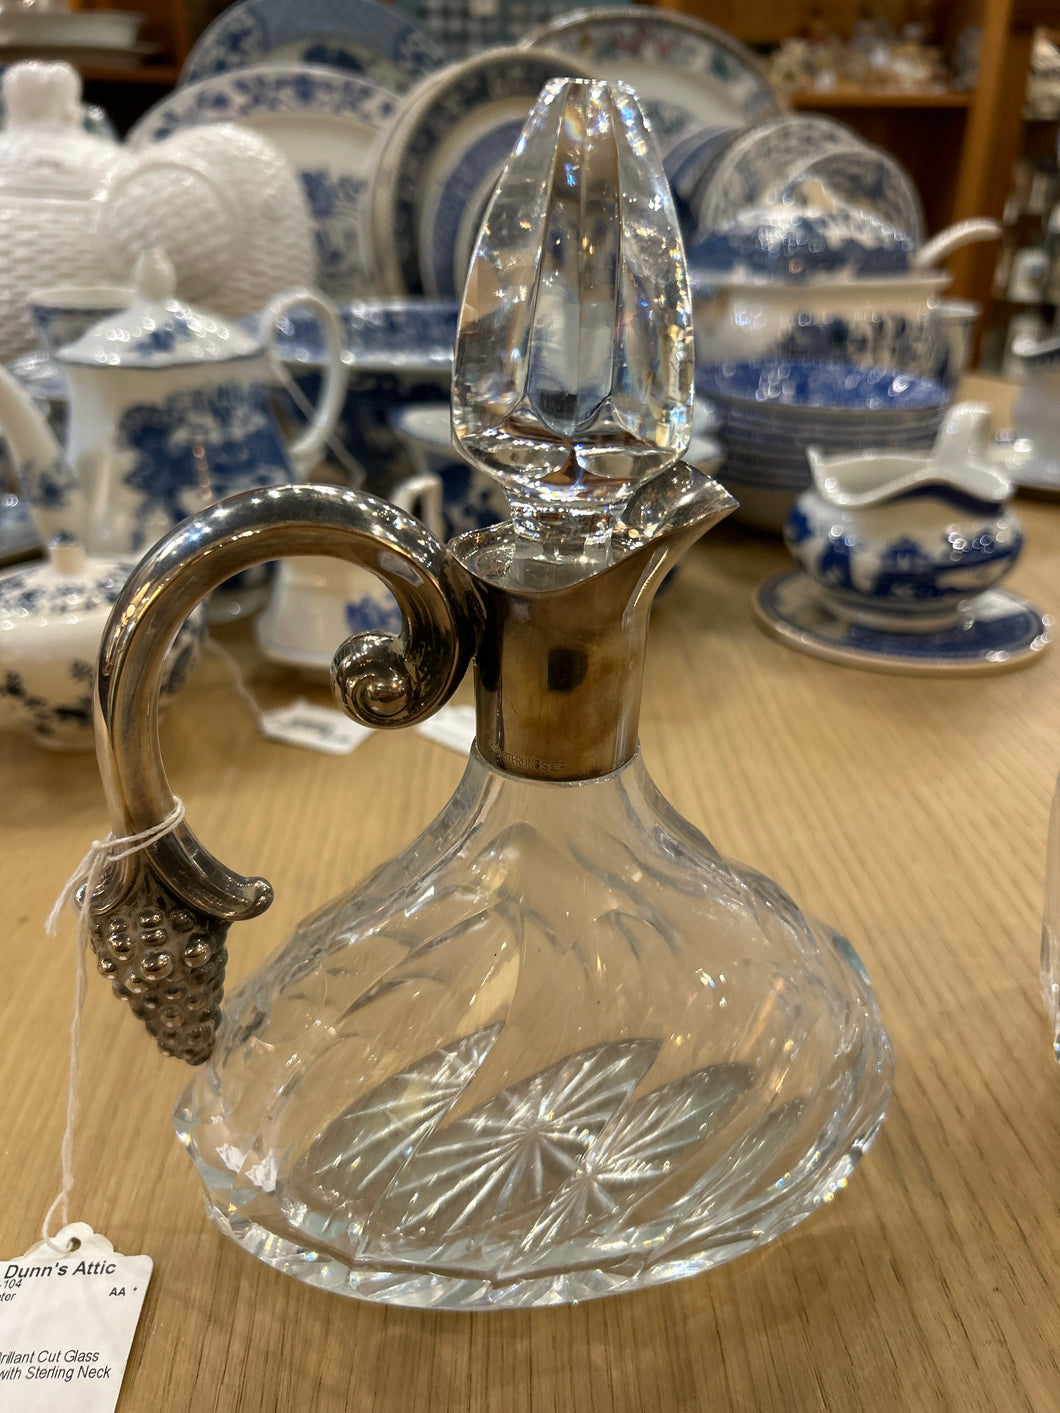 Antique Brilliant Cut Glass Decanter with Sterling Neck and Handle